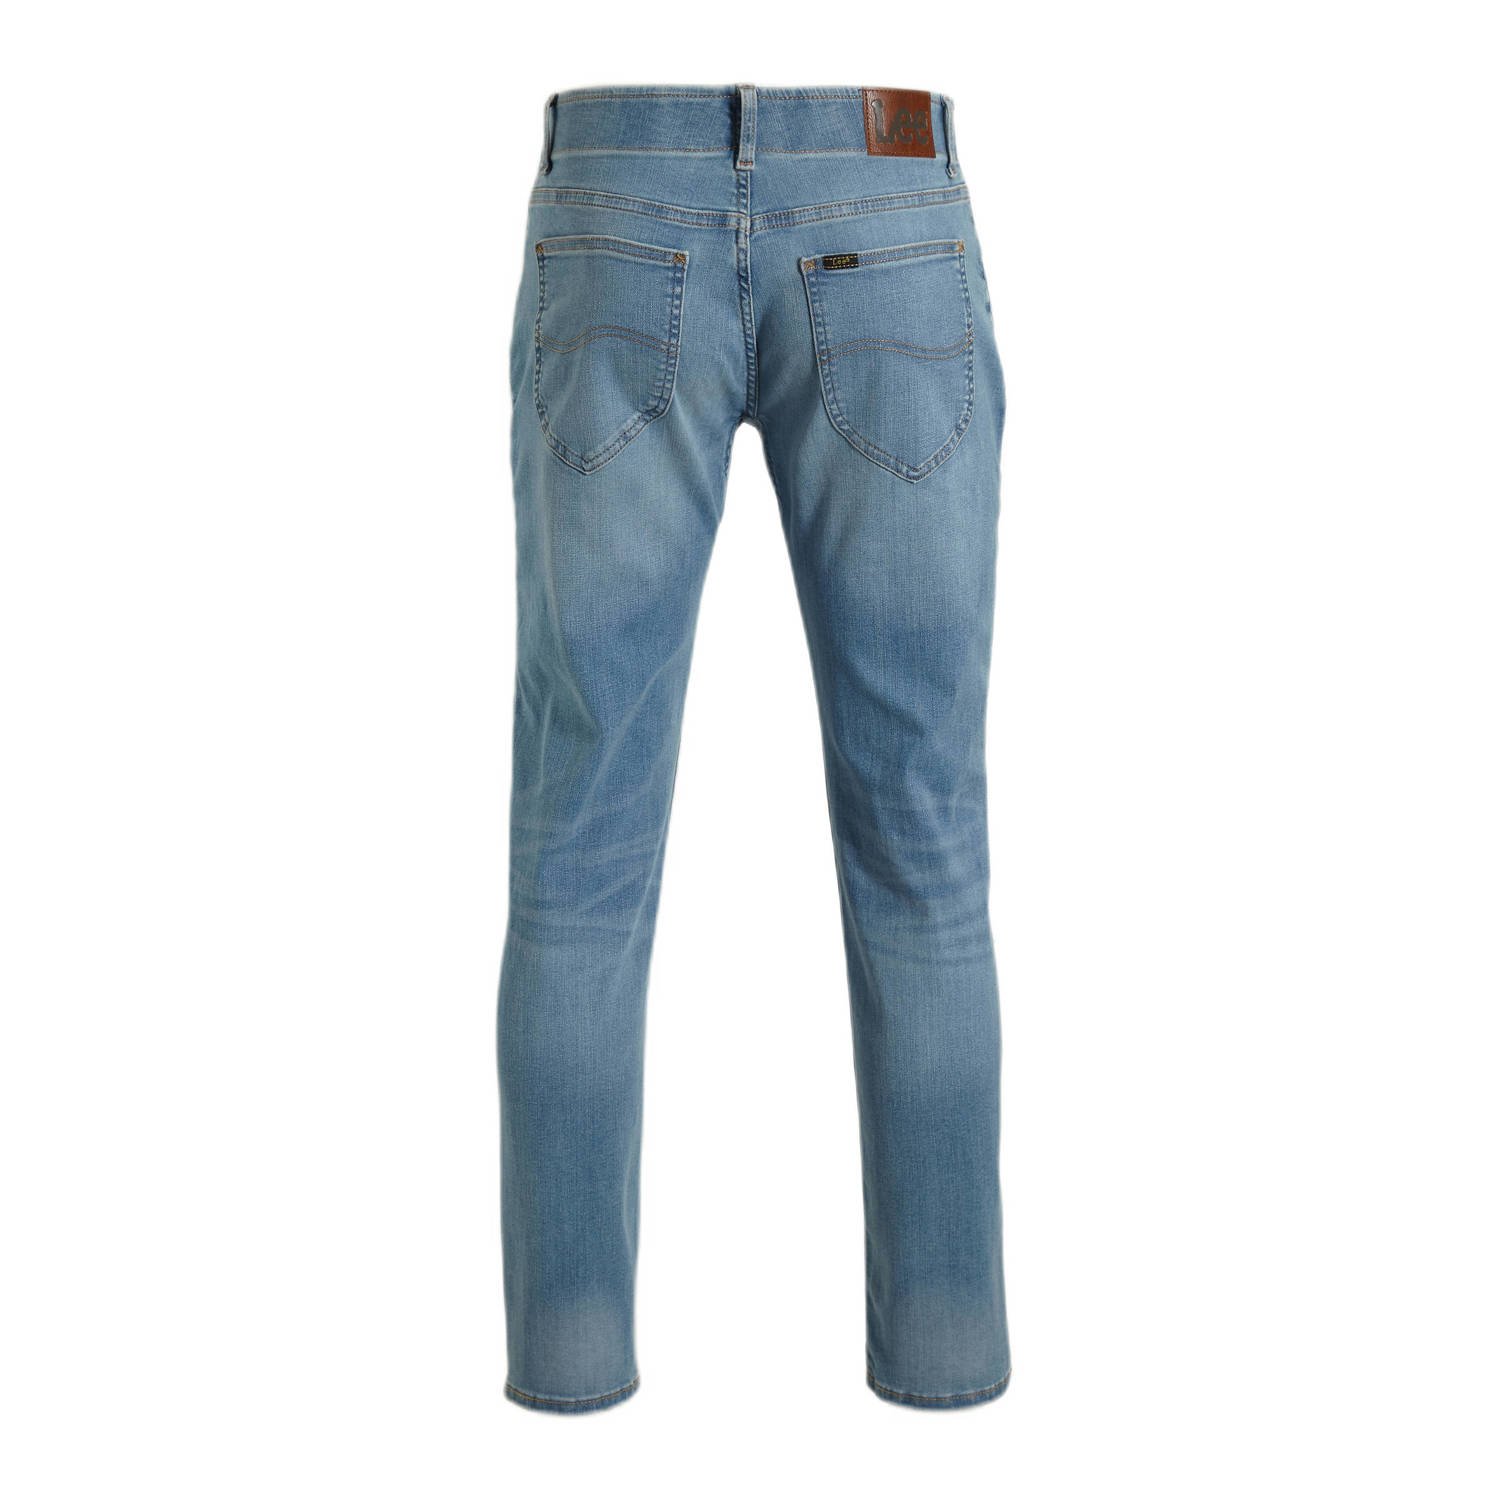 Lee straight fit jeans jaire